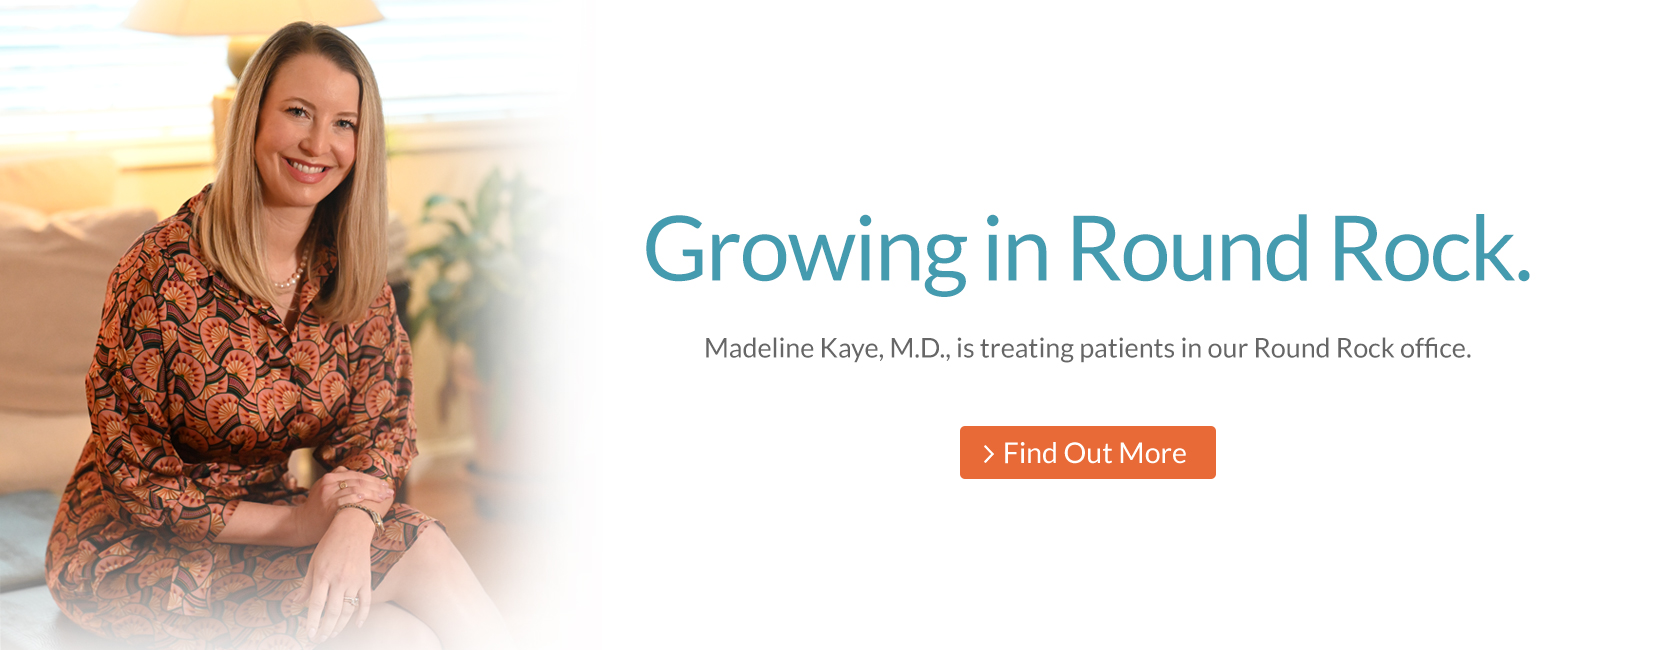 Dr Madeline Kaye is joining TFC in Round Rock